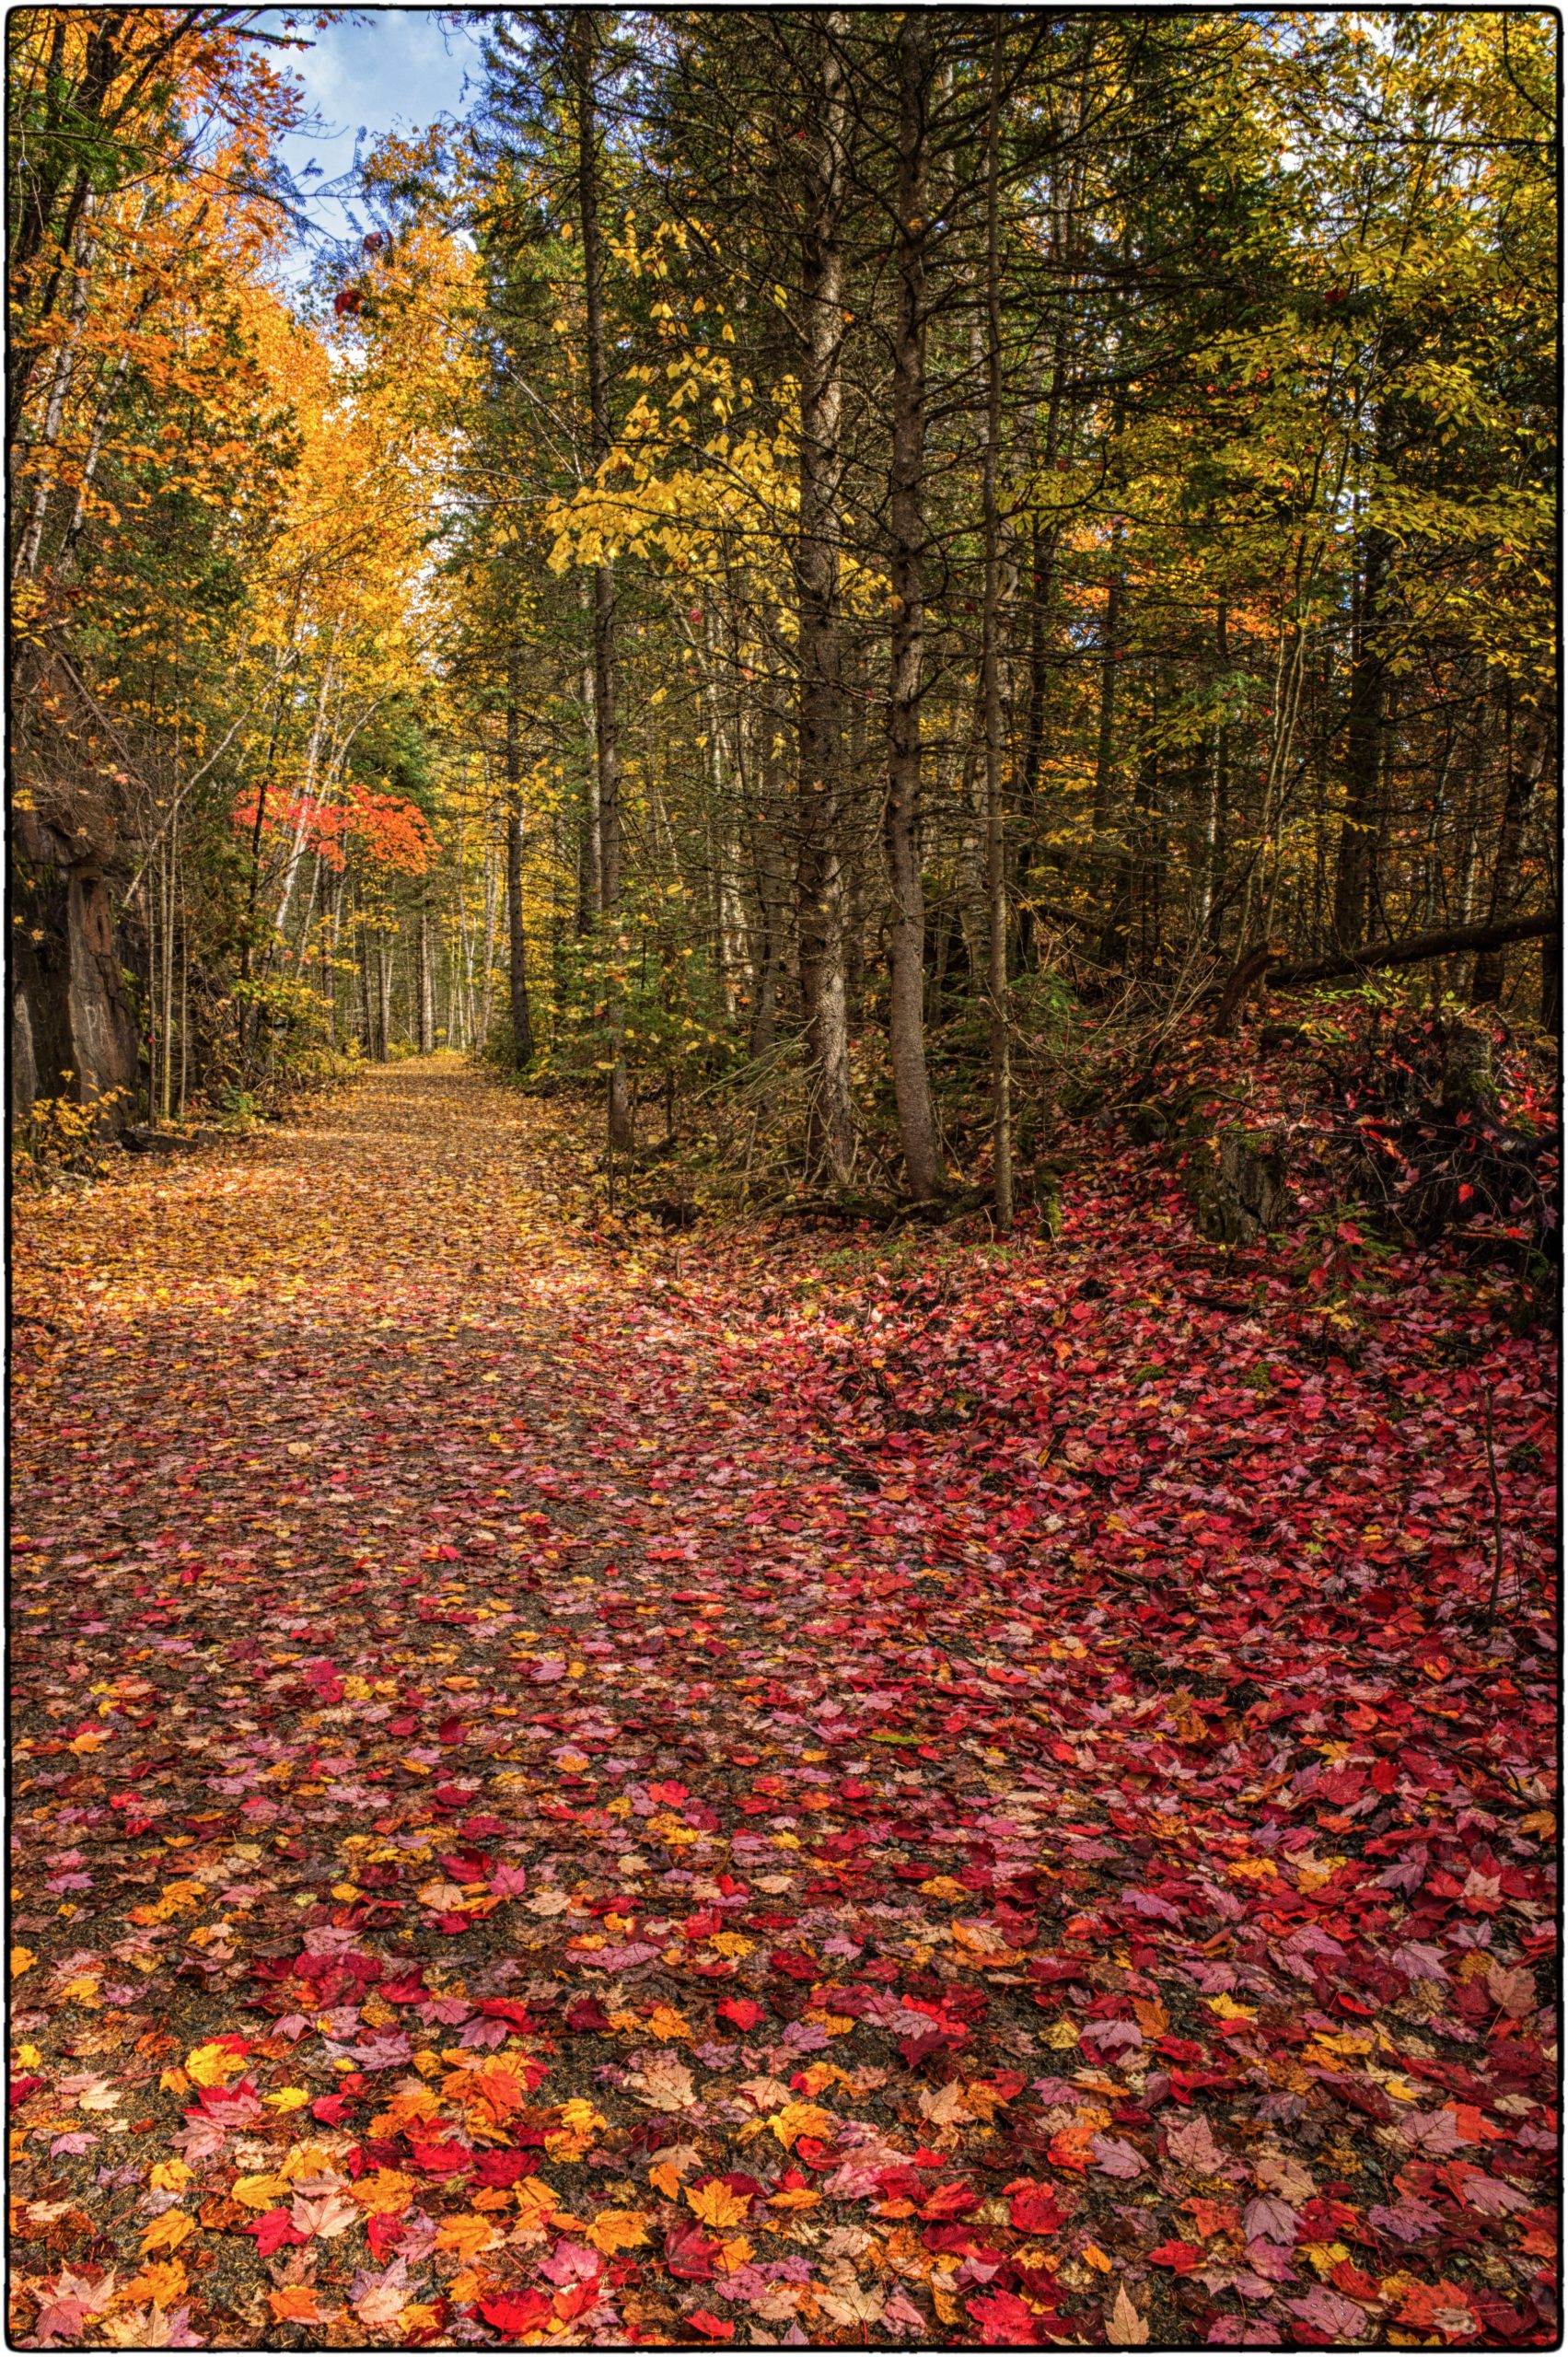 Trail of Leaves